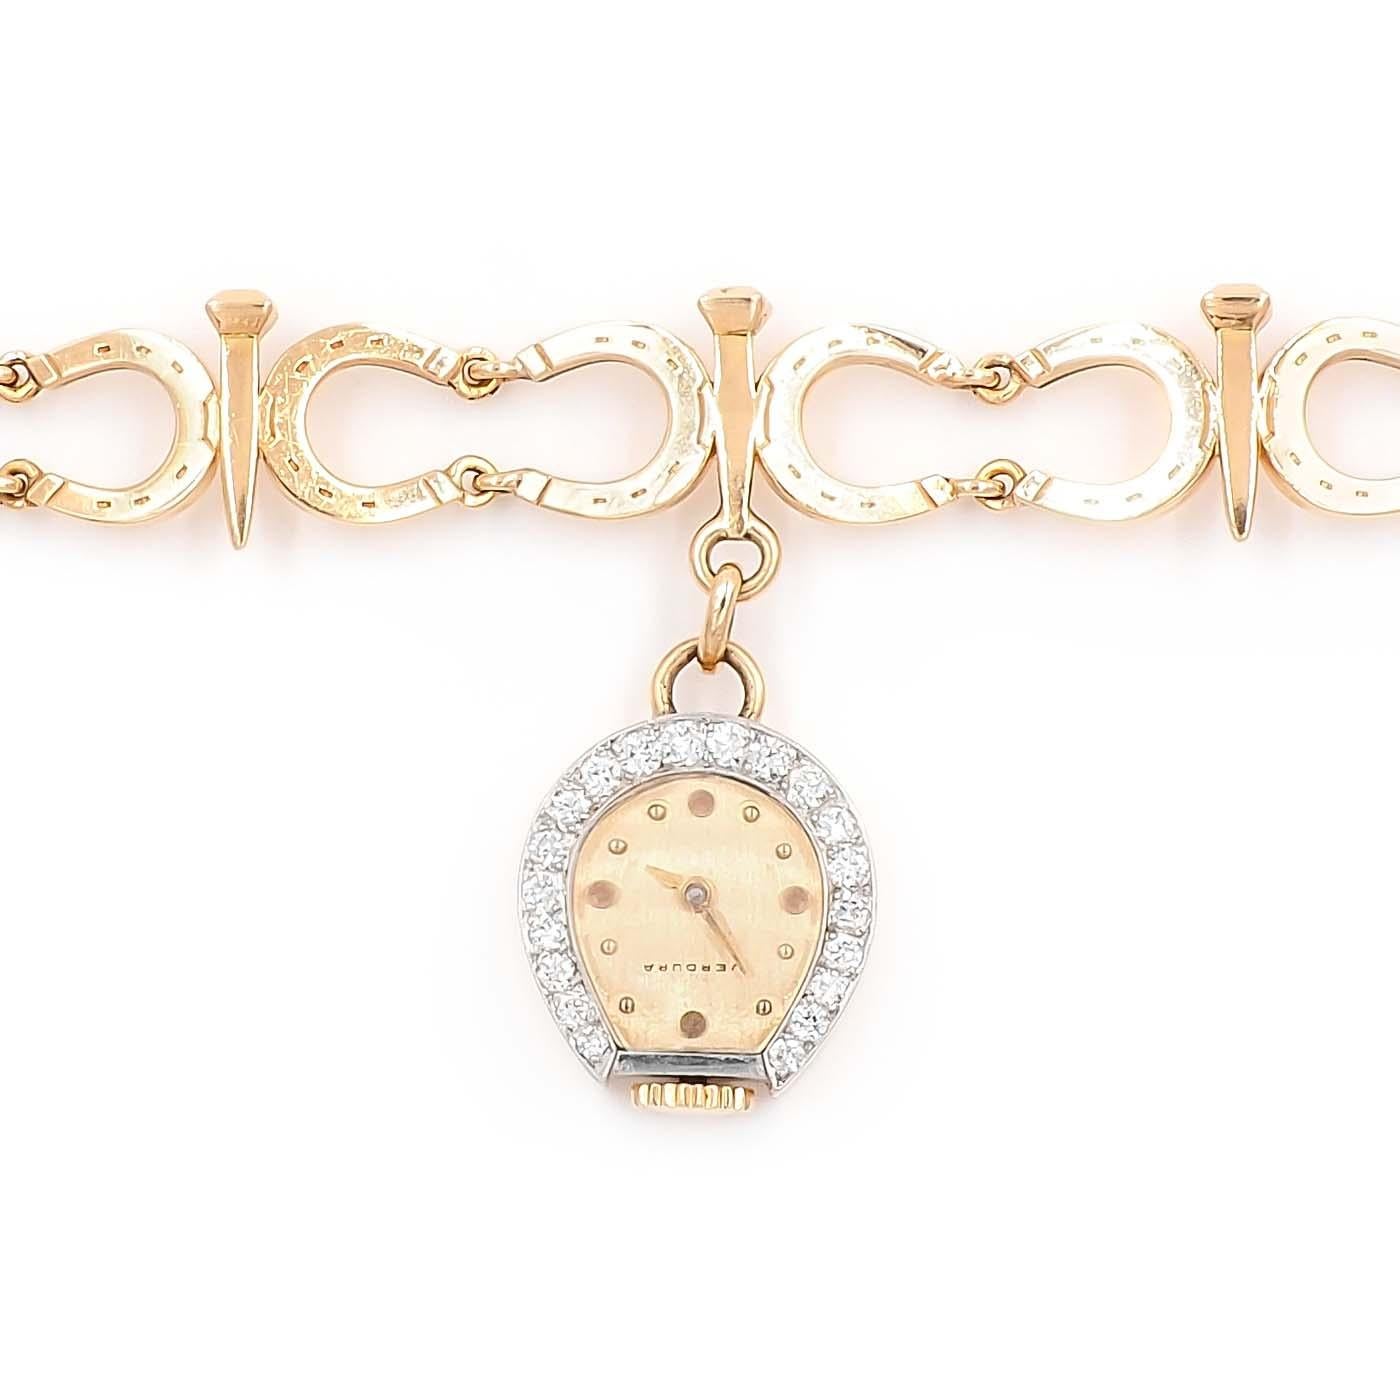 Retro Diamond Horseshoe Bracelet with Watch Charm by Verdura, composed of 14k yellow gold. With a horseshoe-shaped watch charm, composed of 14k yellow gold and platinum, featuring 20 Round Cut diamonds that weigh approximately 0.45 carats in total.